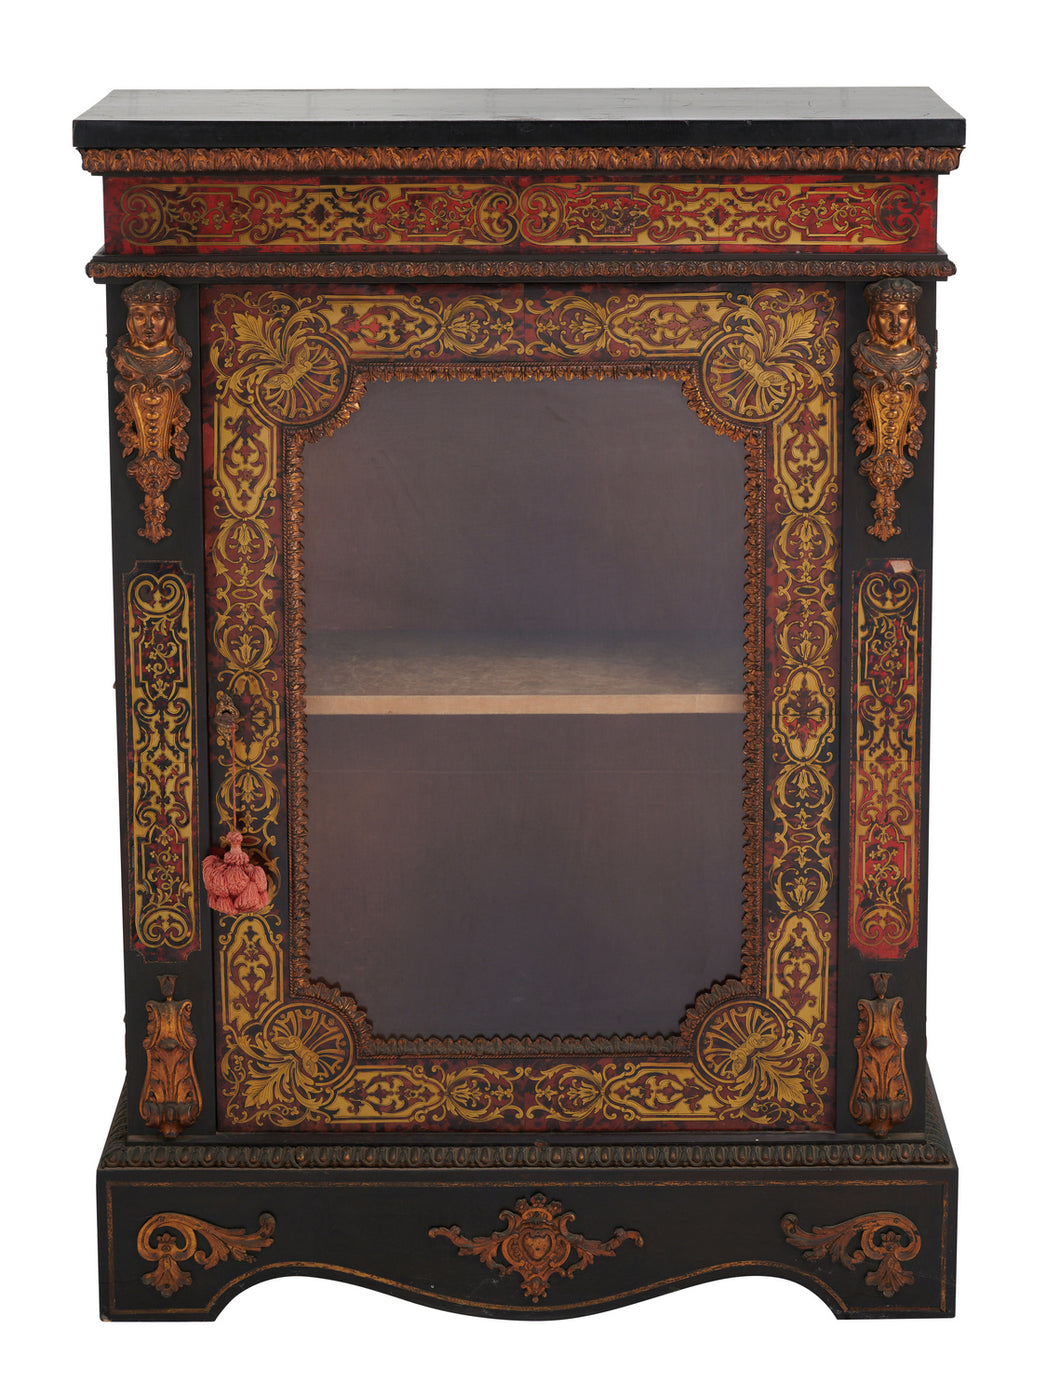 A NAPOLEON III BOULLE MANNER PIER CABINET 19th century